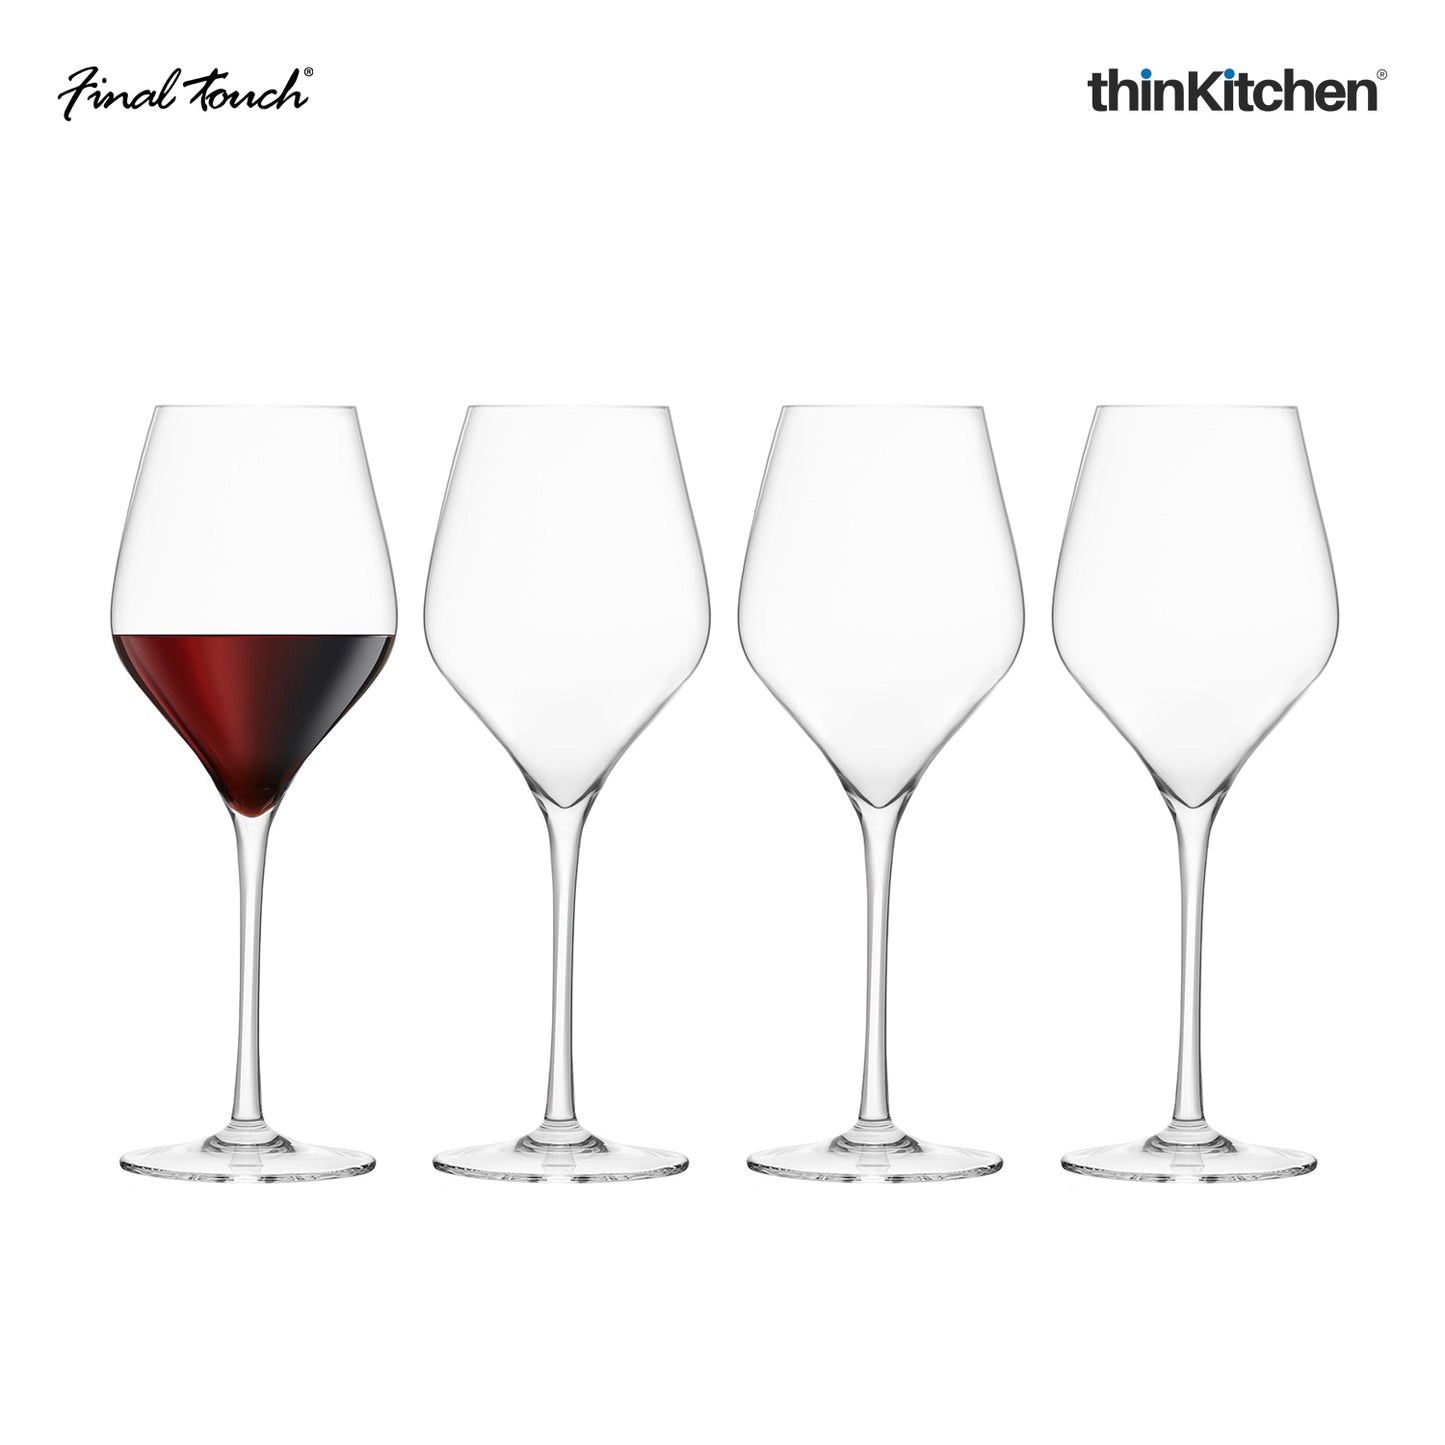 Final Touch Red Wine Lead Free Crystal Glasses Set Of 4